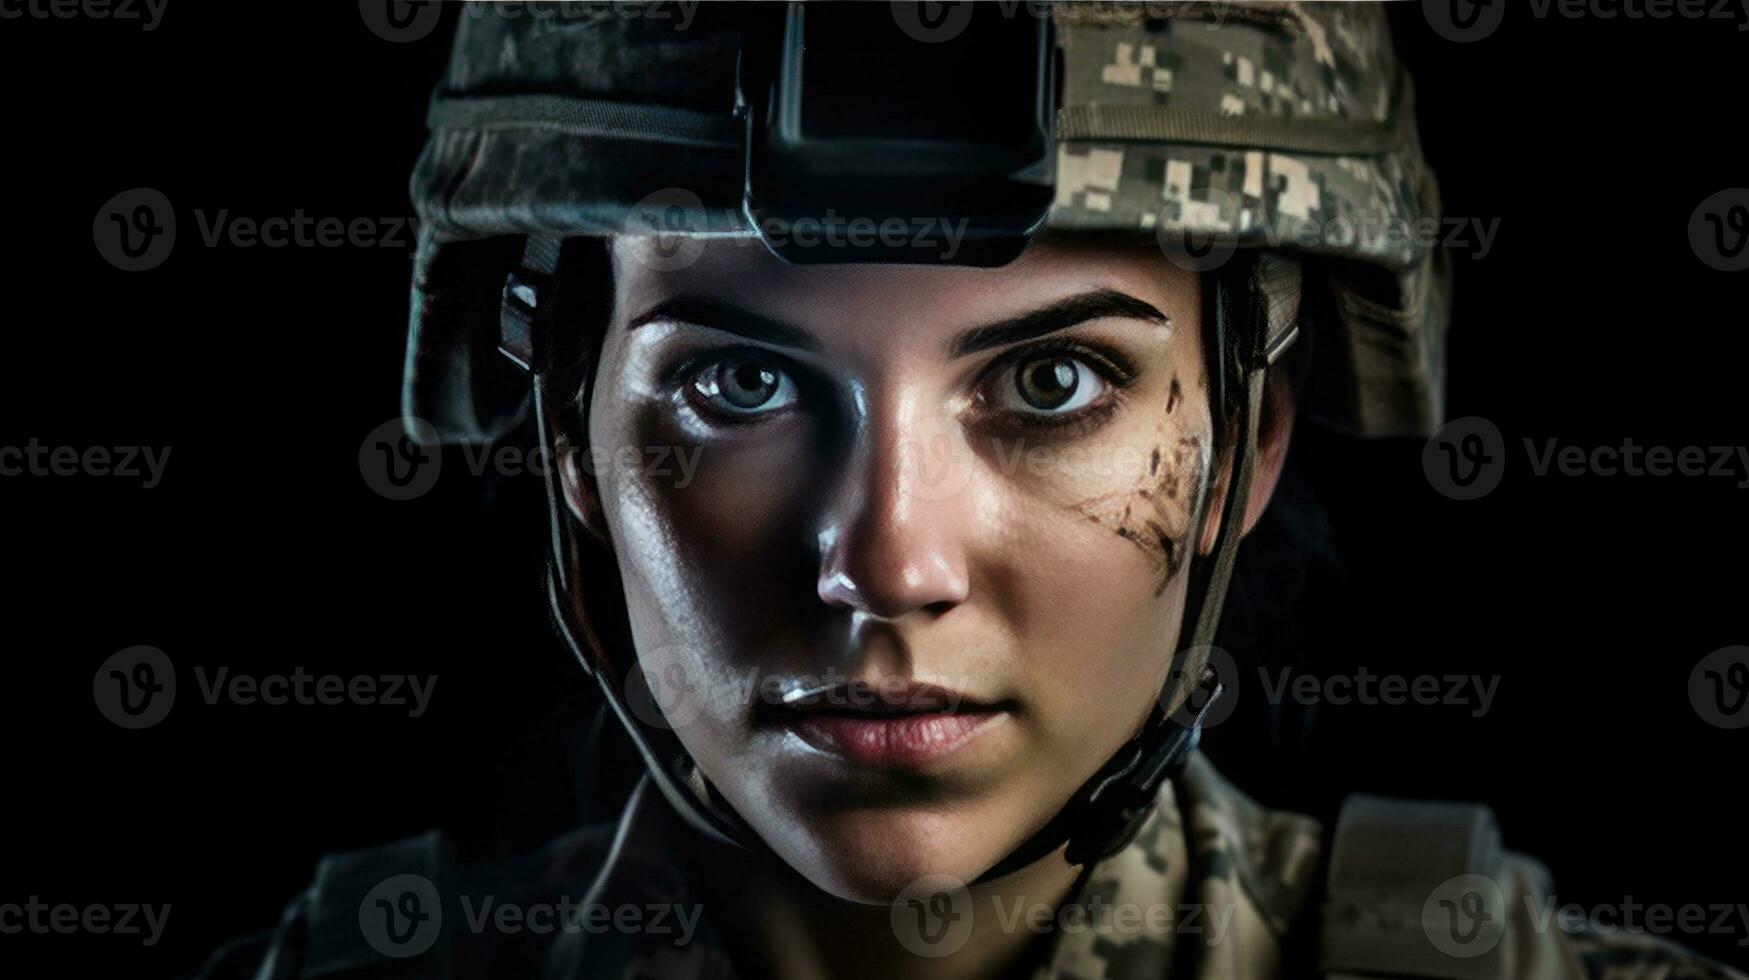 Urban Warfare A Tactical Squad Member in Combat Ready Gear and